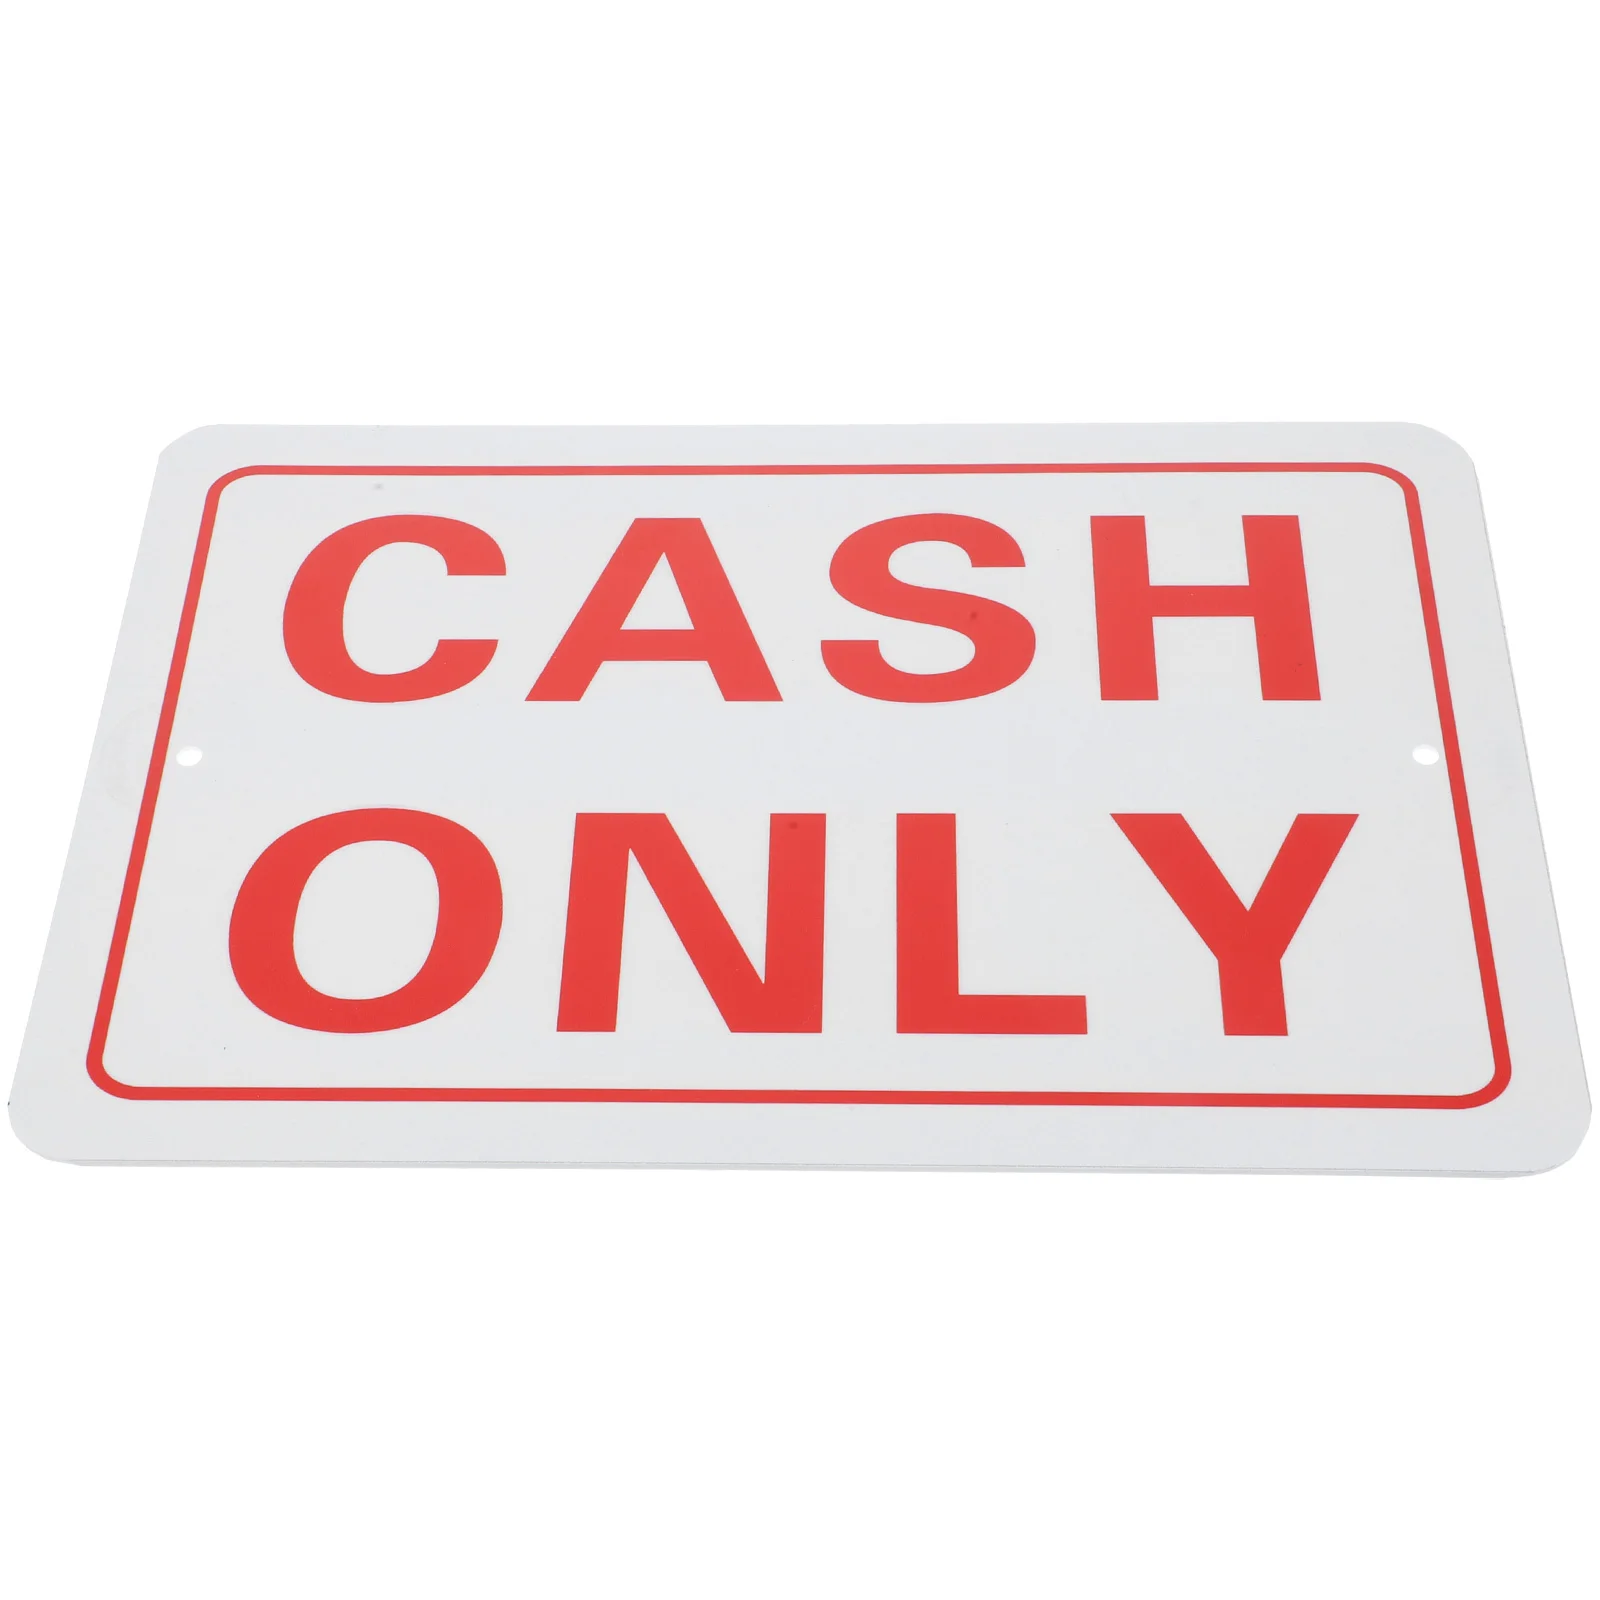 

Cash Sign Cashier for Store Emblems The Business No Credit Card Signs Wall Only Pvc Shop Office